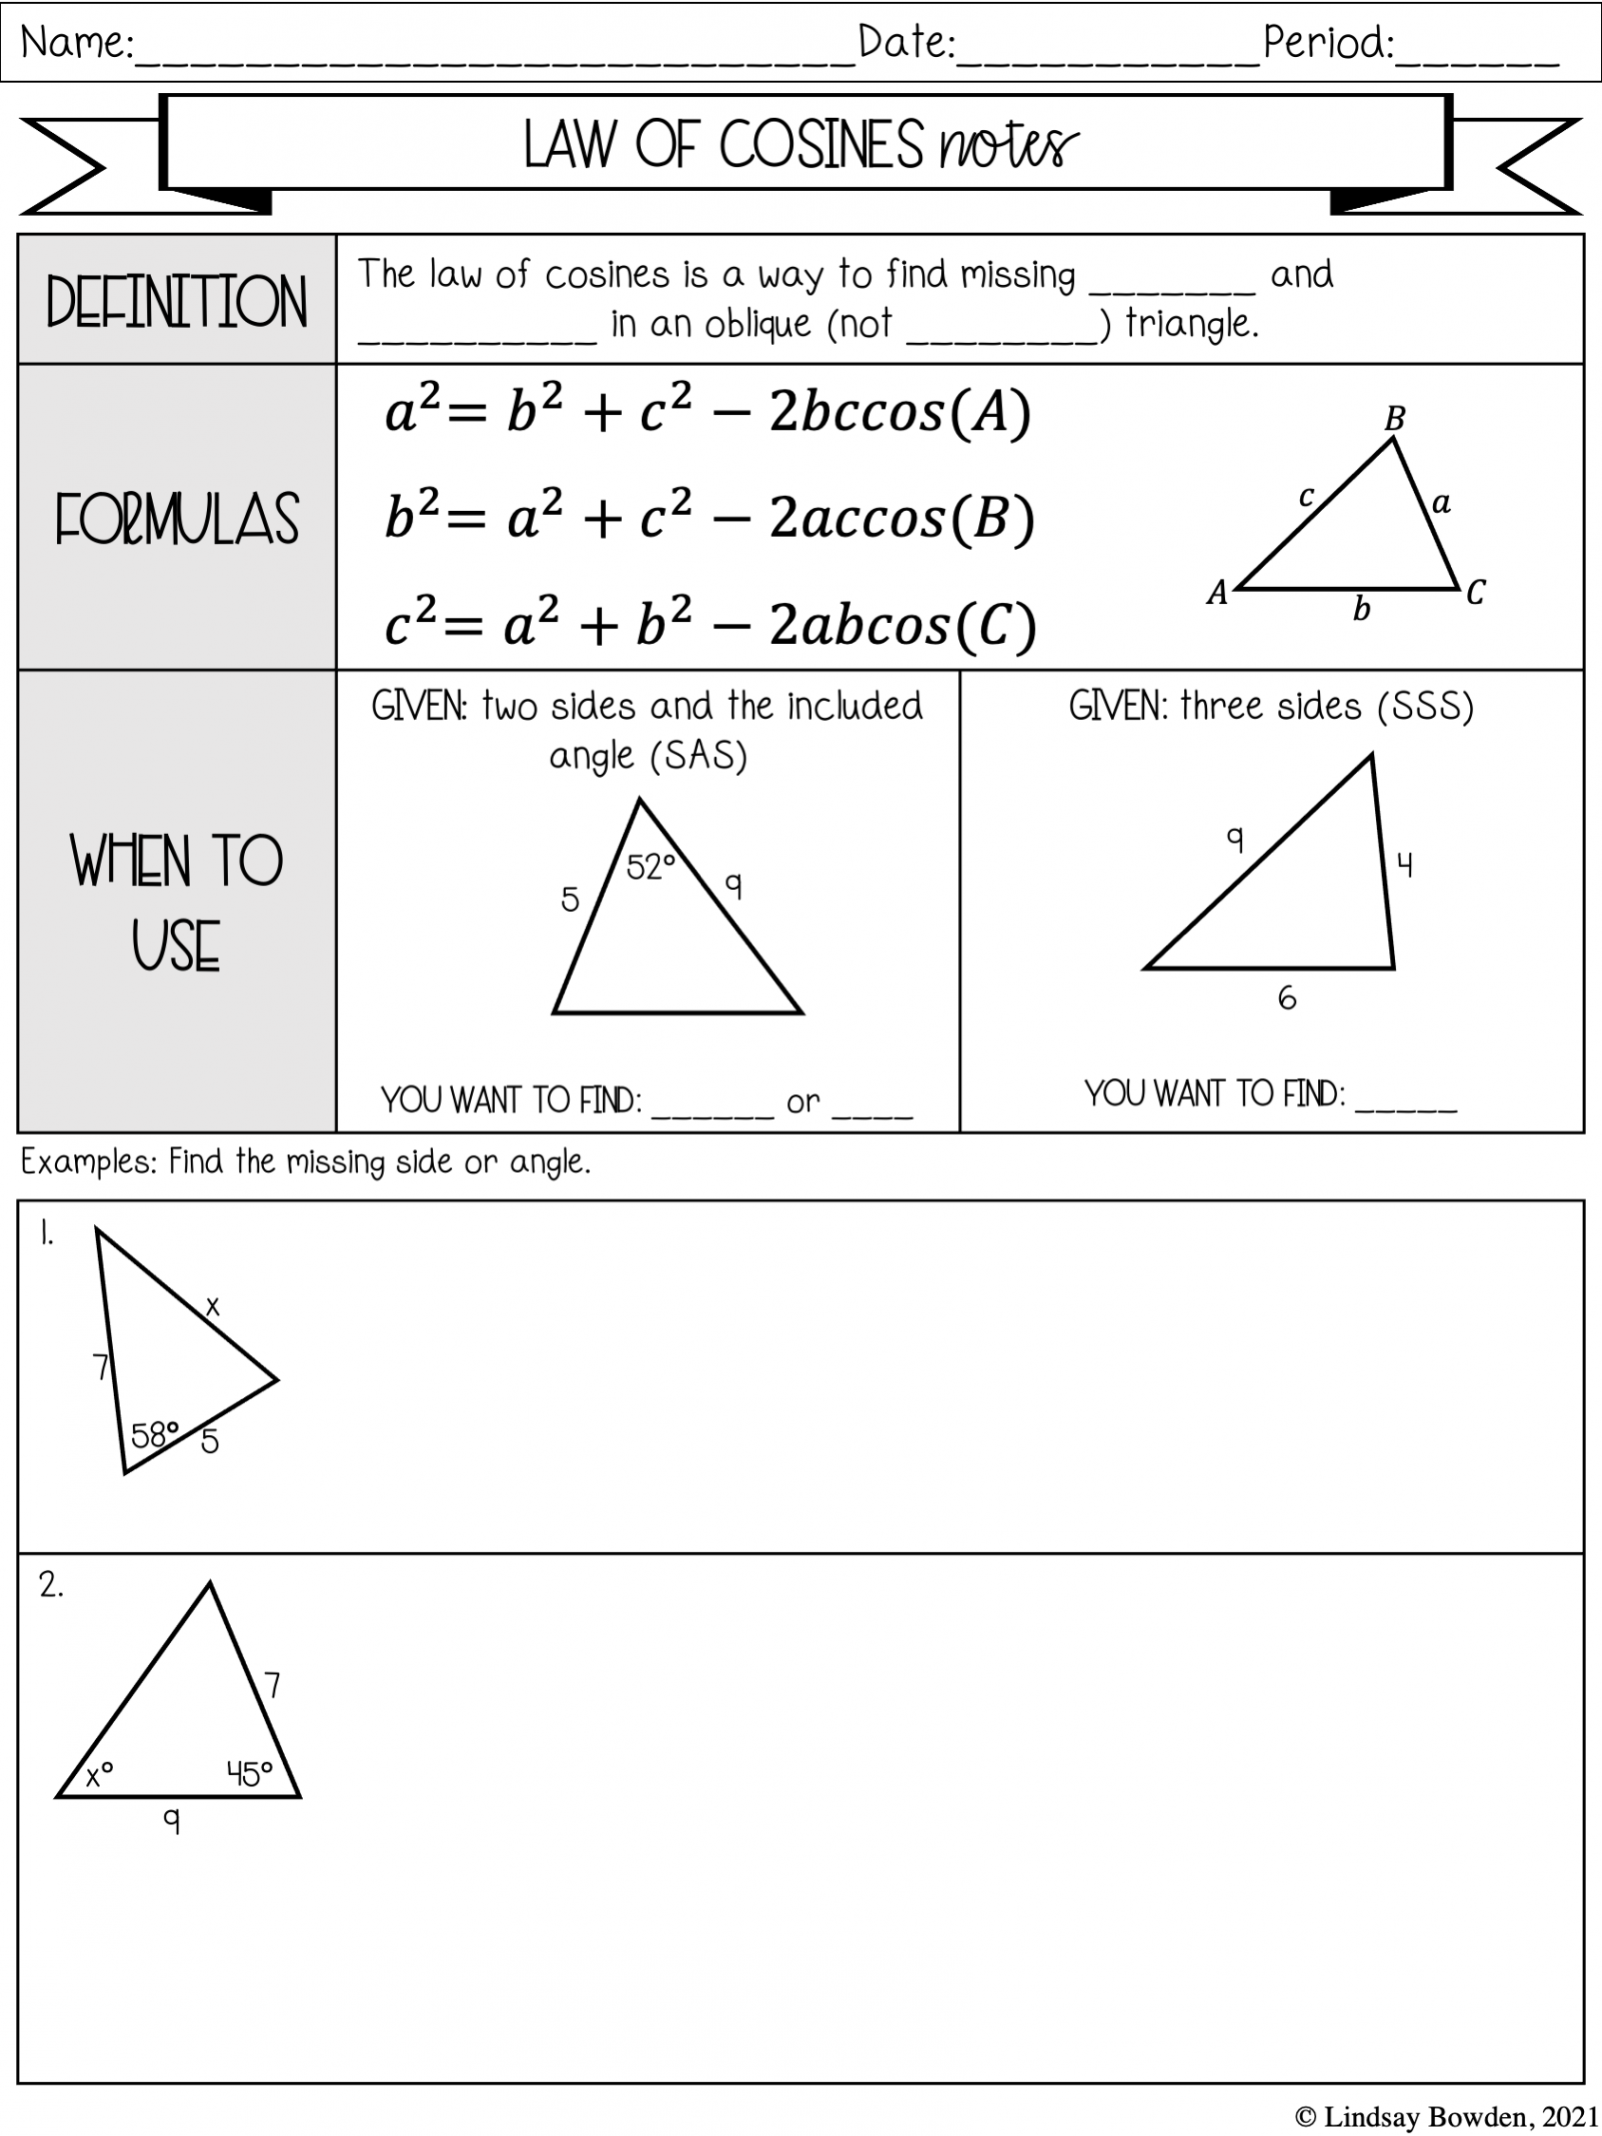 Law of Sines and Cosines Notes and Worksheets - Lindsay Bowden